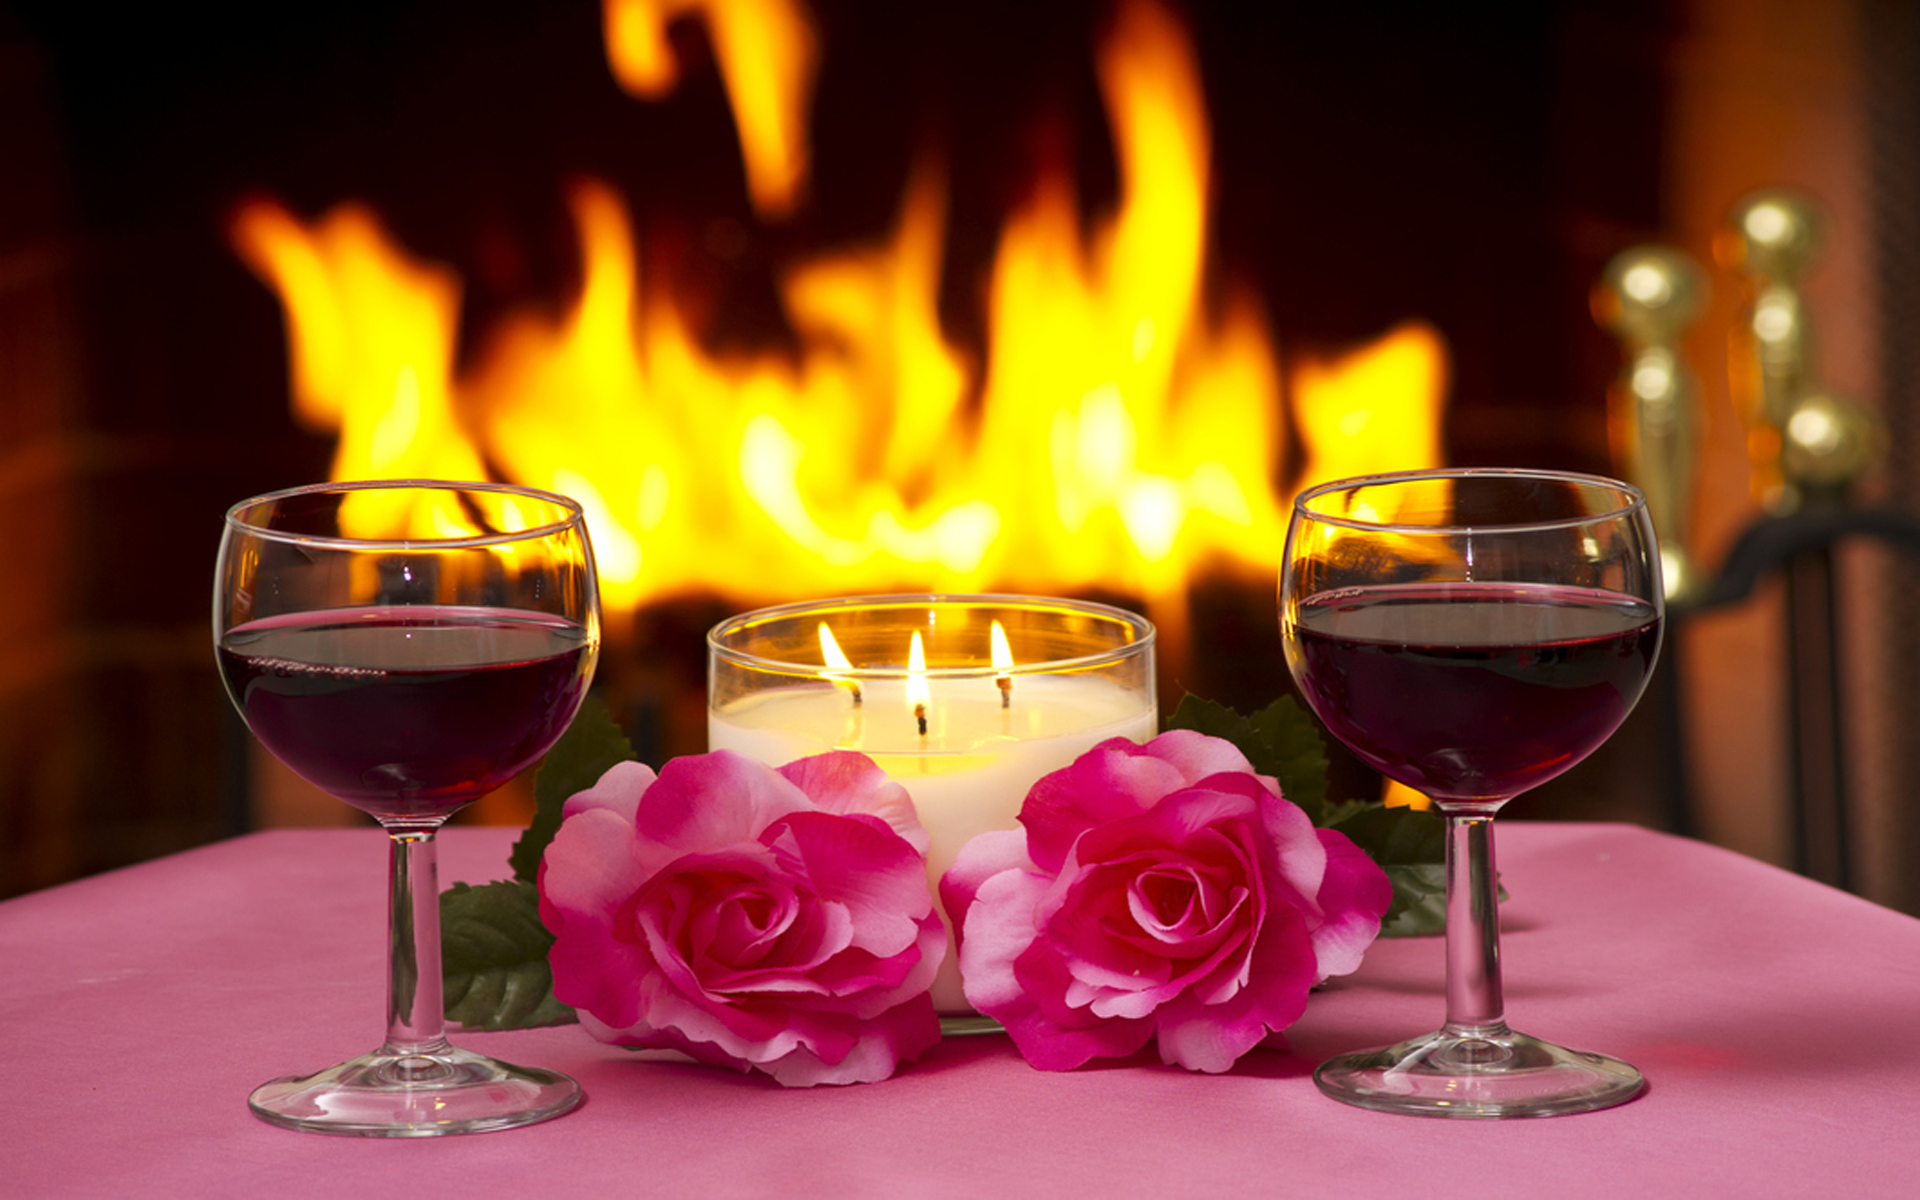 Massa two pink roses lamp lit candles two glasses of red wine a fireplace with a fire lit romantic evening for two Wallpaper HD for mobile phone